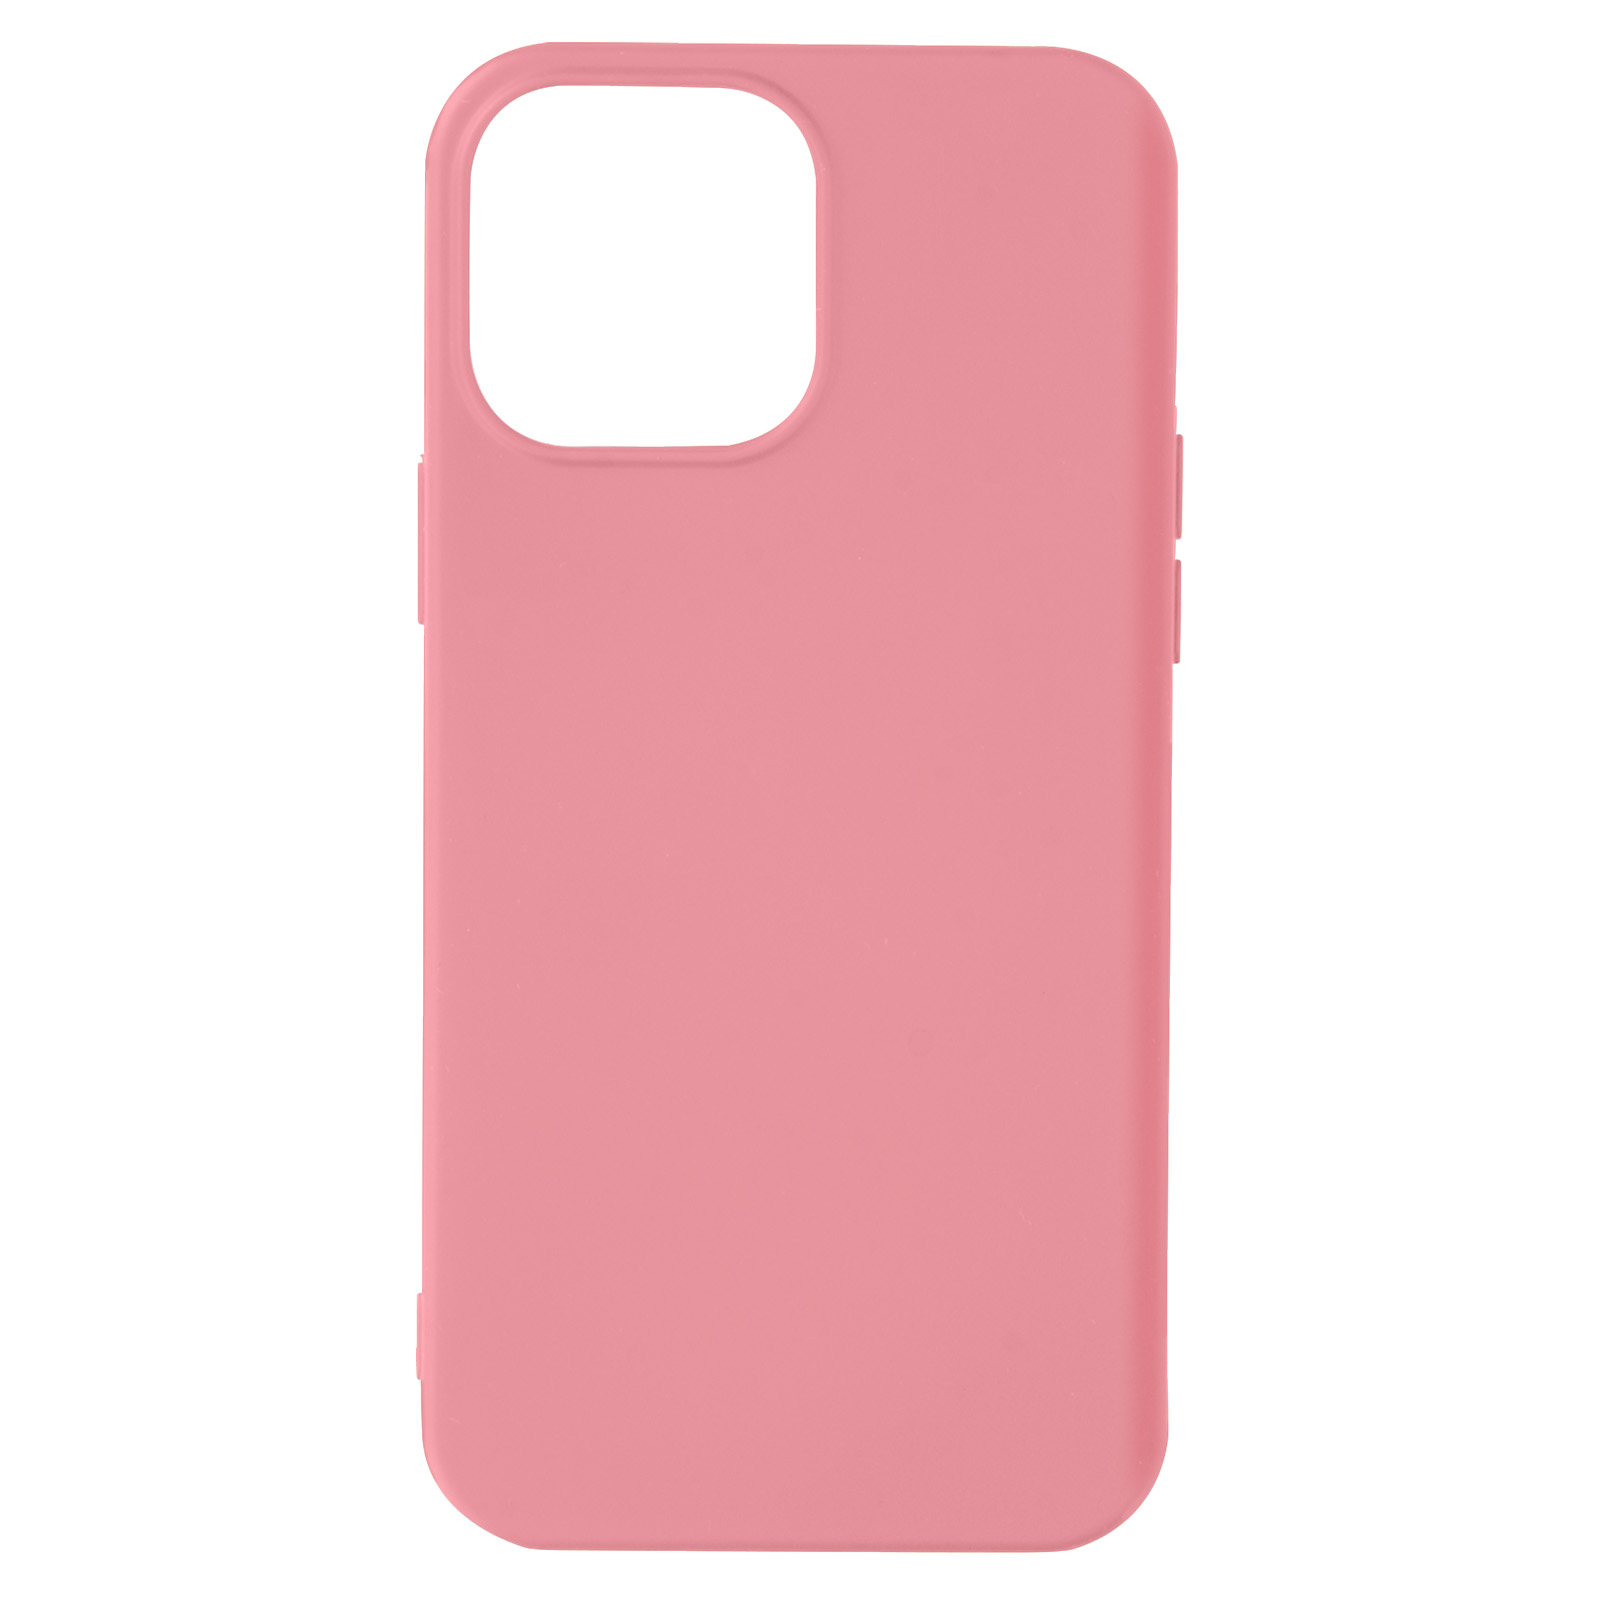 Pro, Backcover, 13 Series, Apple, Fast AVIZAR iPhone Rosa